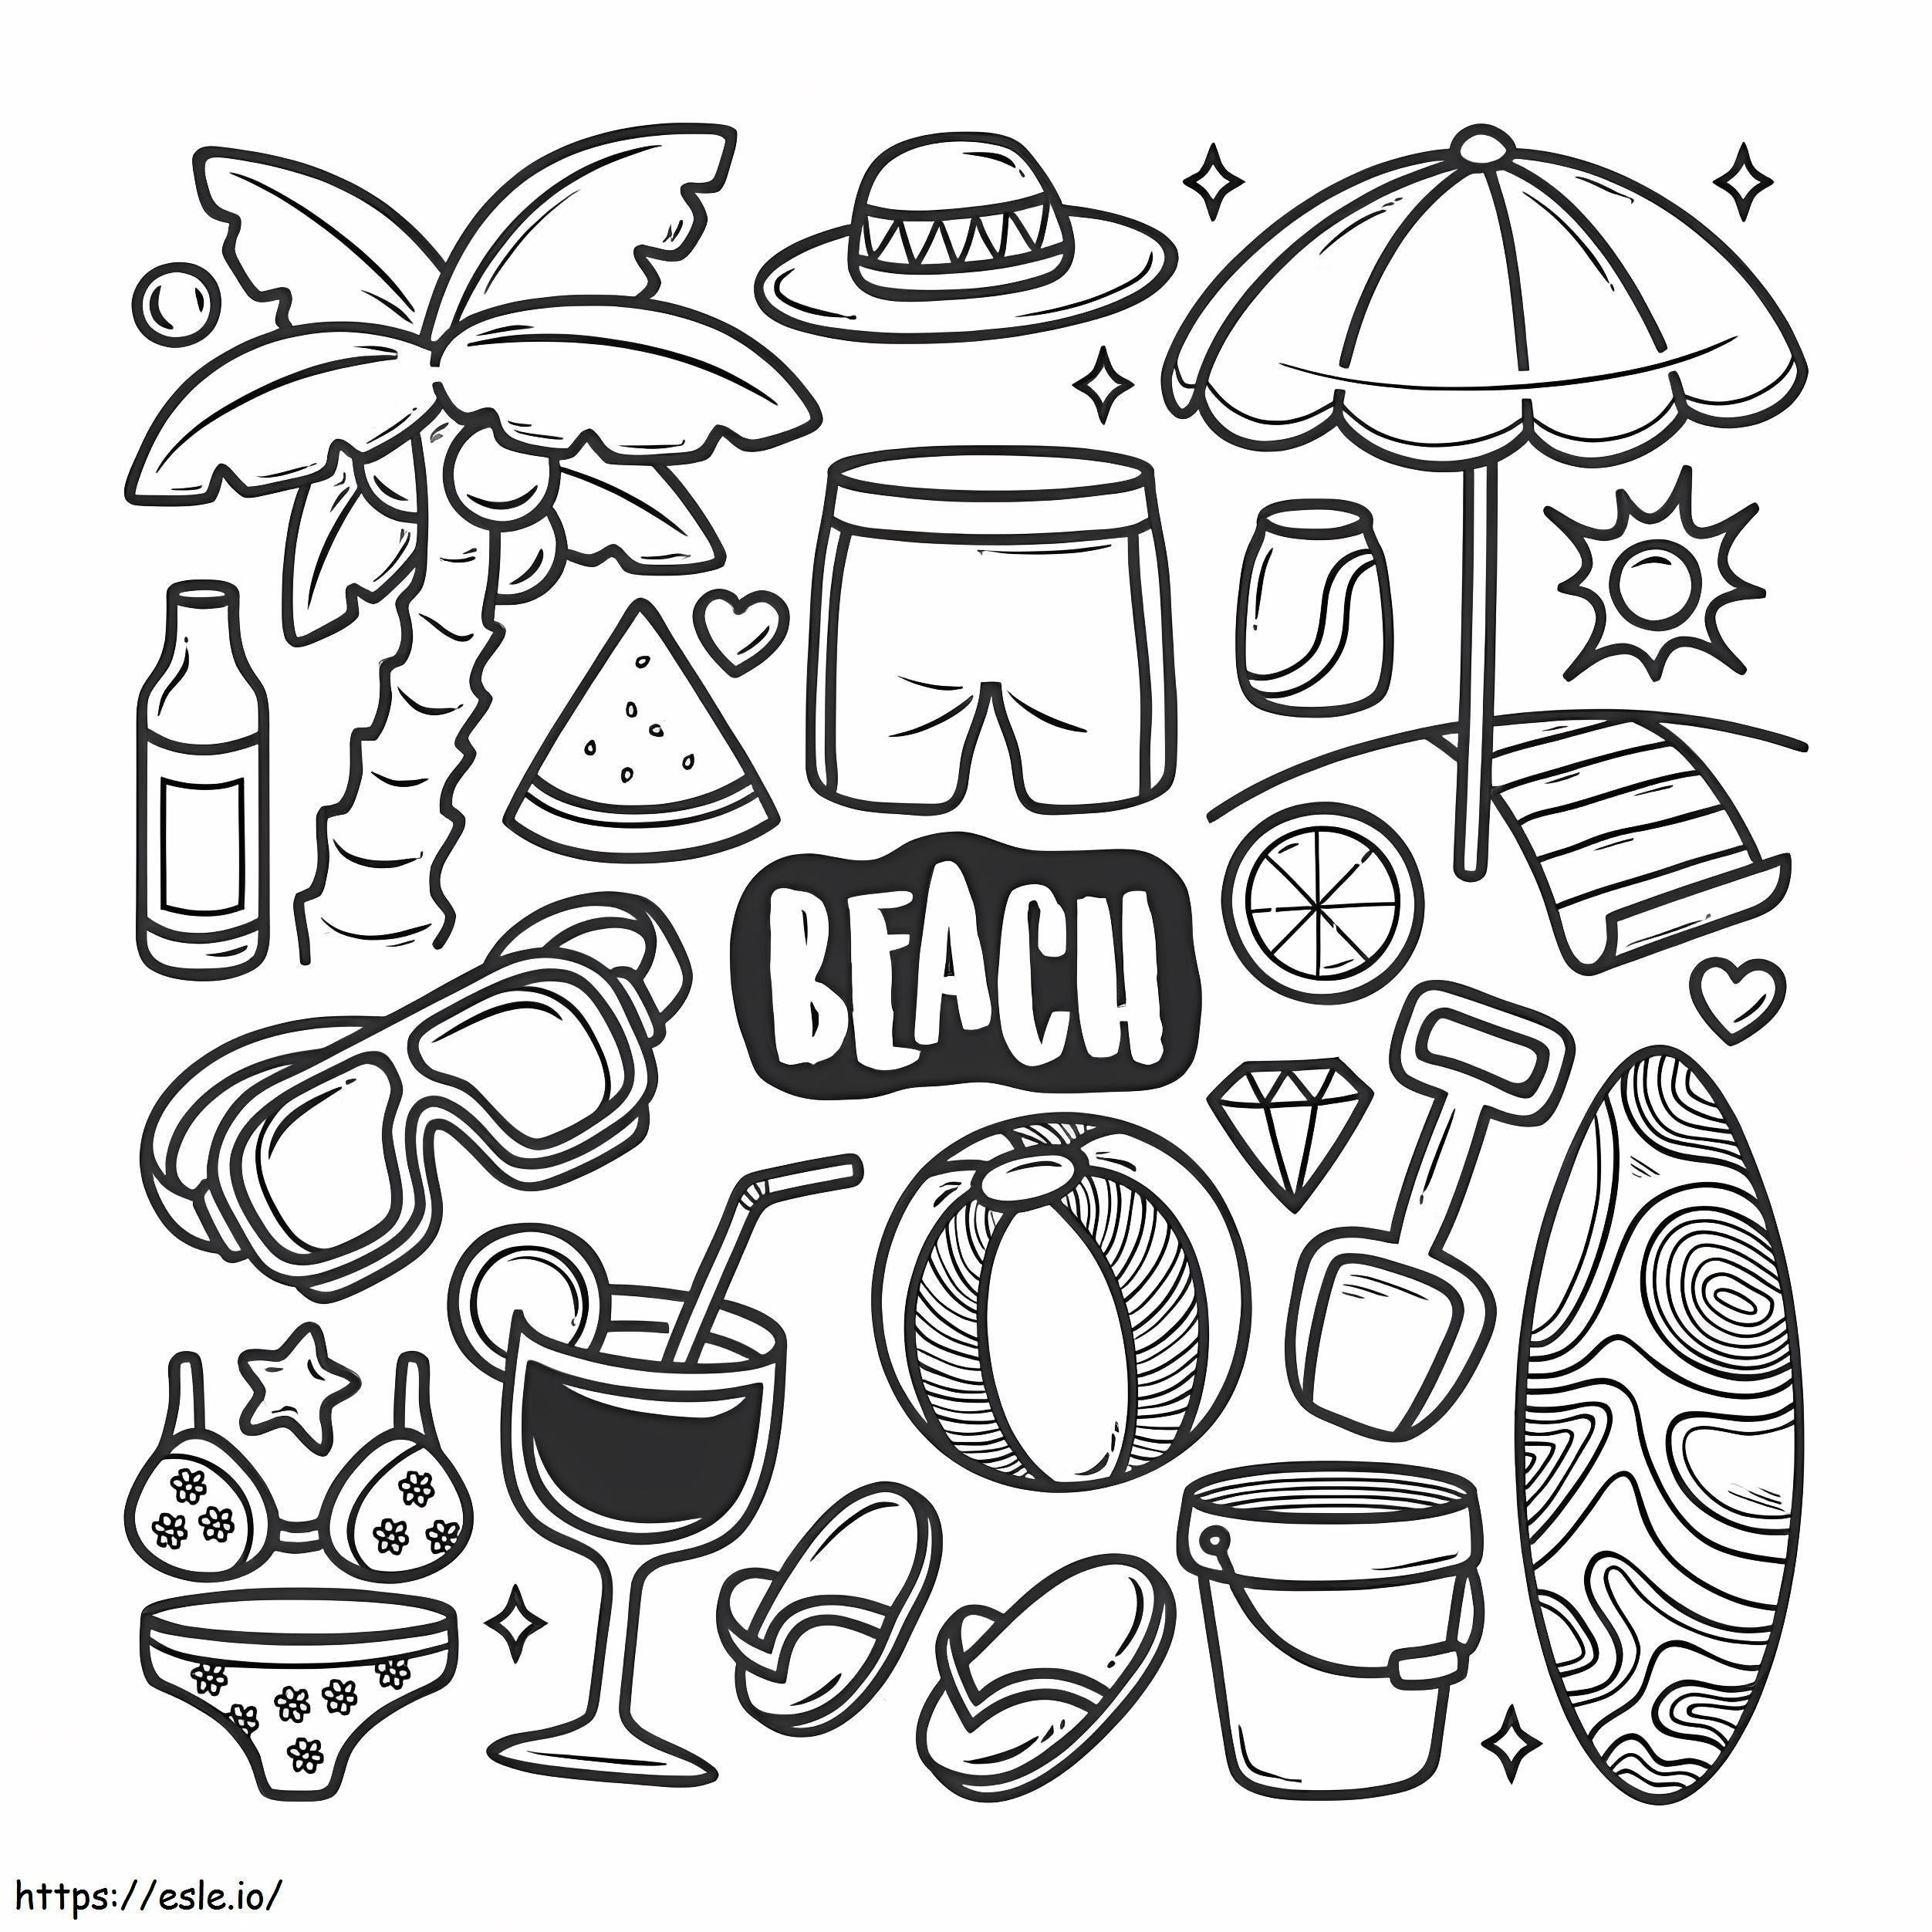 Summer Aesthetics 2 coloring page